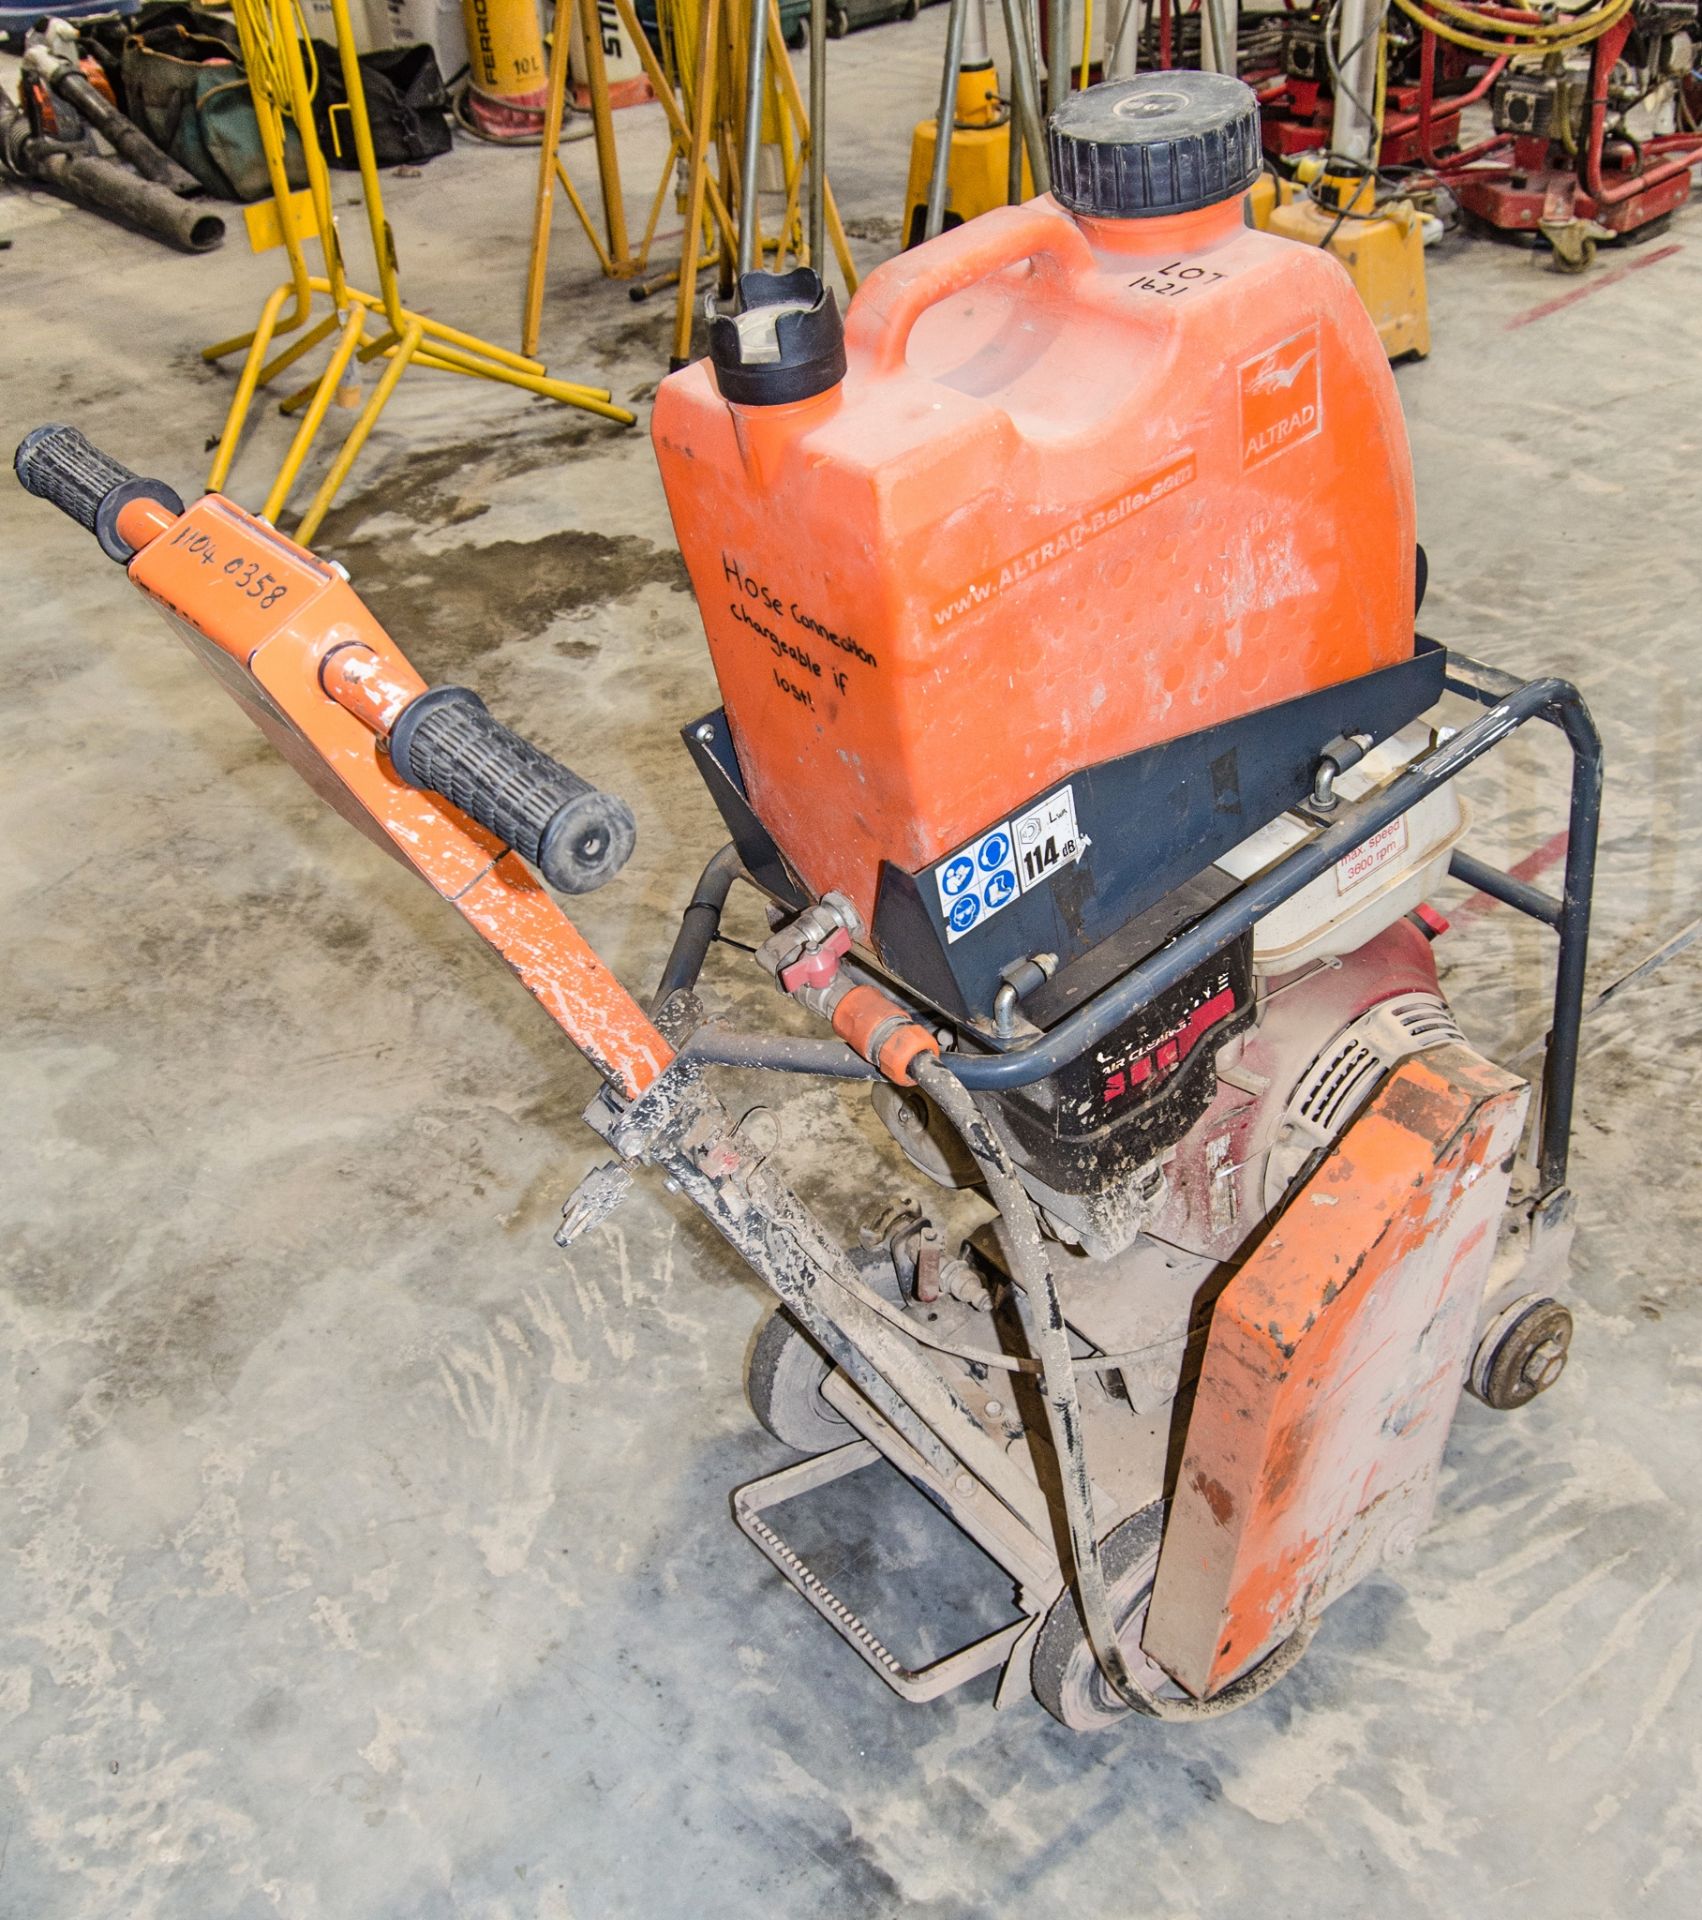 Altrad Belle Compact 350X petrol driven road saw 11040358 - Image 2 of 3